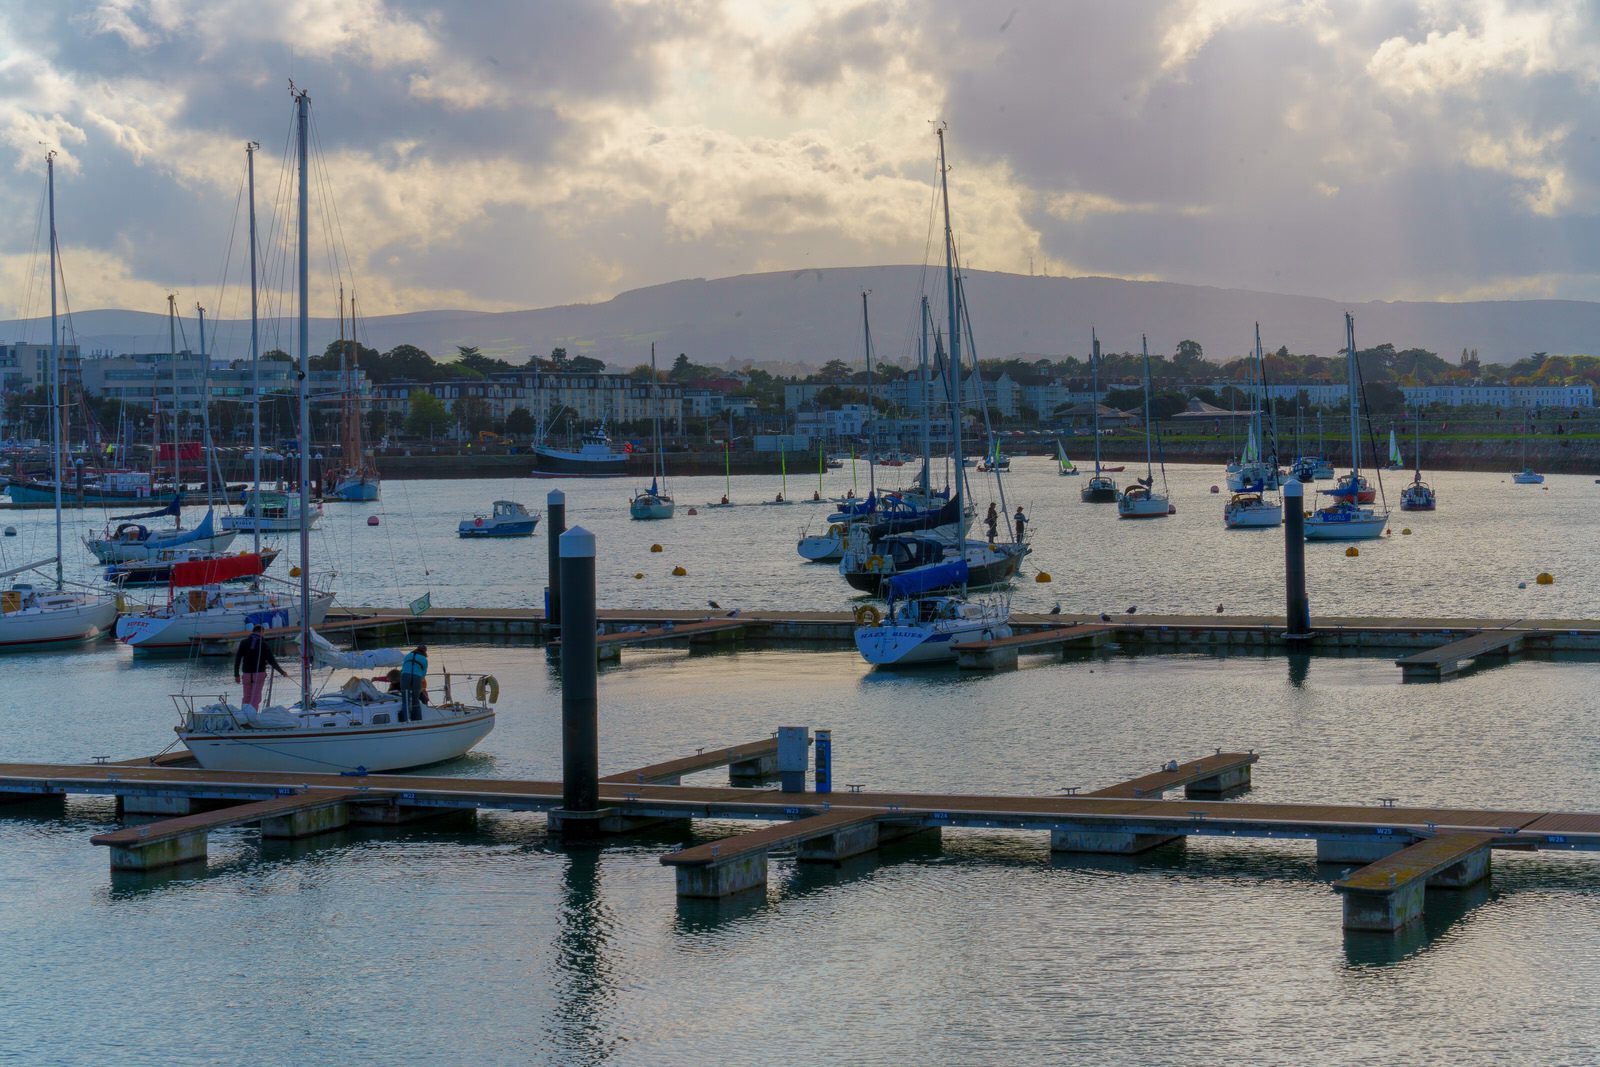 THE SECTION OF THE MARINA NEAR THE WESTERN BREAKWATER [DUN LAOGHAIRE HARBOUR] 007